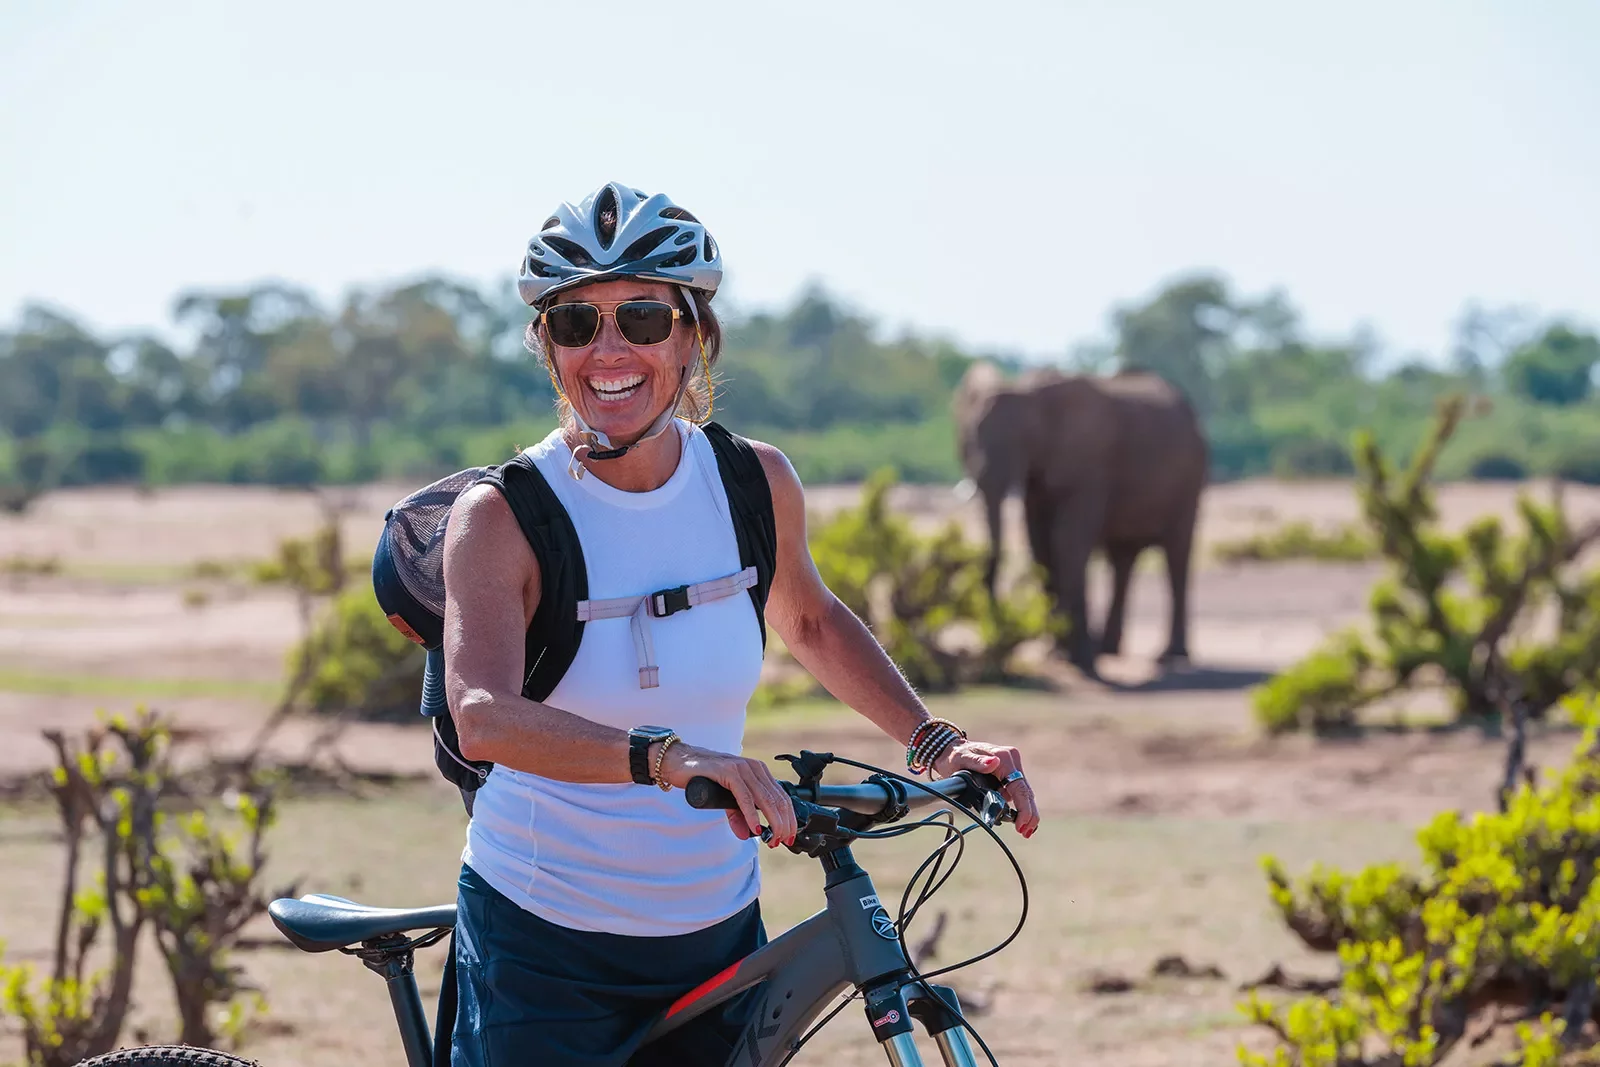 A person with a bike poses in front of an elephant